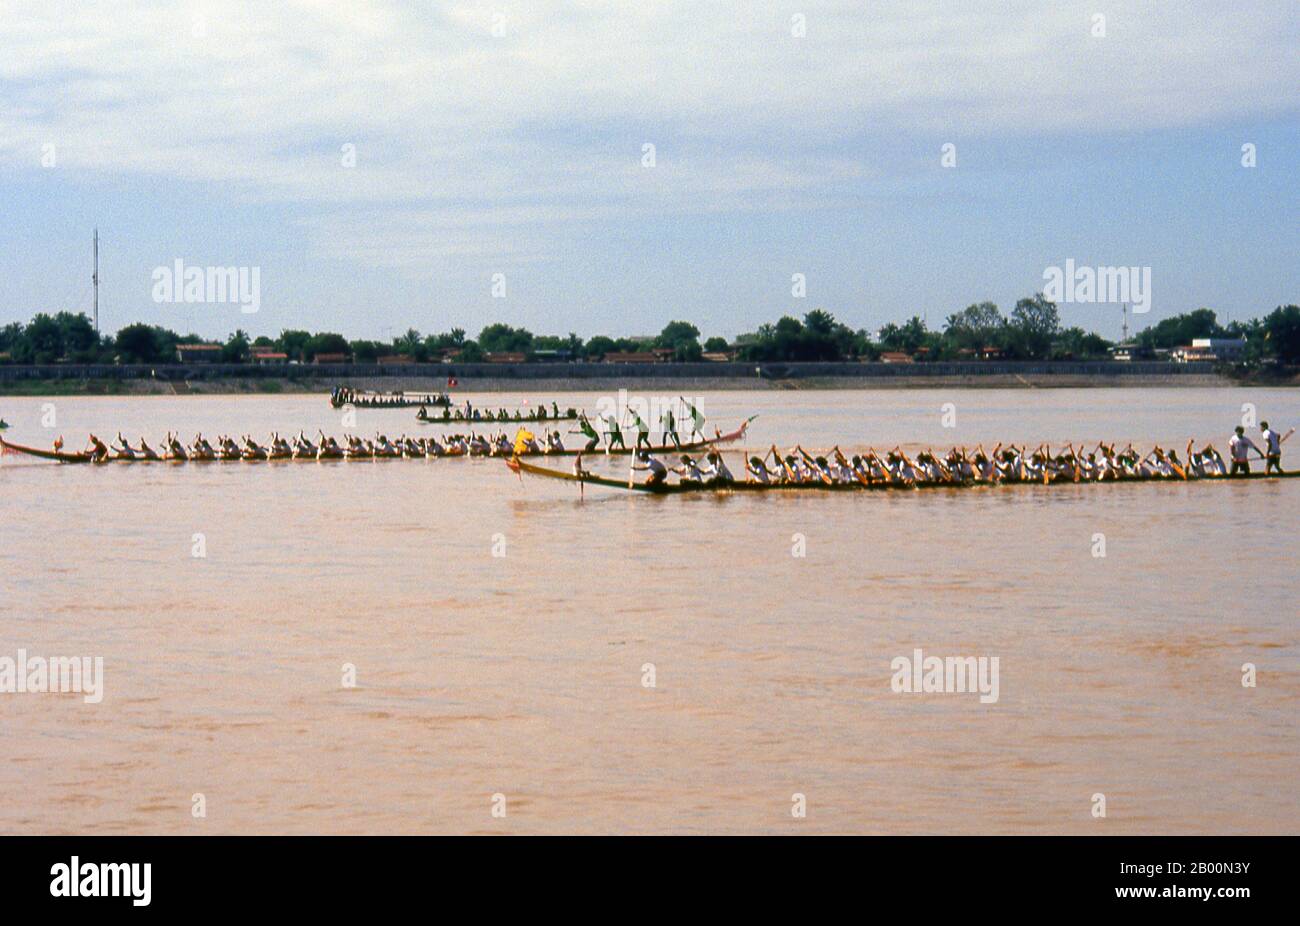 Laos: Boat races on the Mekong River at Vientiane, Bun Nam Festival. Photo by David Henley.  In Laos, the Awk Phansaa (Awk Watsa, full moon) Festival celebrates the end of the three-month rains retreat. Monks are allowed to leave the monasteries to travel and are presented with robes, alms bowls and other requisites of the renunciative life.  On the eve of Awk Phansaa many people fashion small banana-leaf boats carrying candles, incense and other offerings, and float them in rivers, a custom known as Lai Hua Fai, similar to Loy Krathong in Thailand. Stock Photo